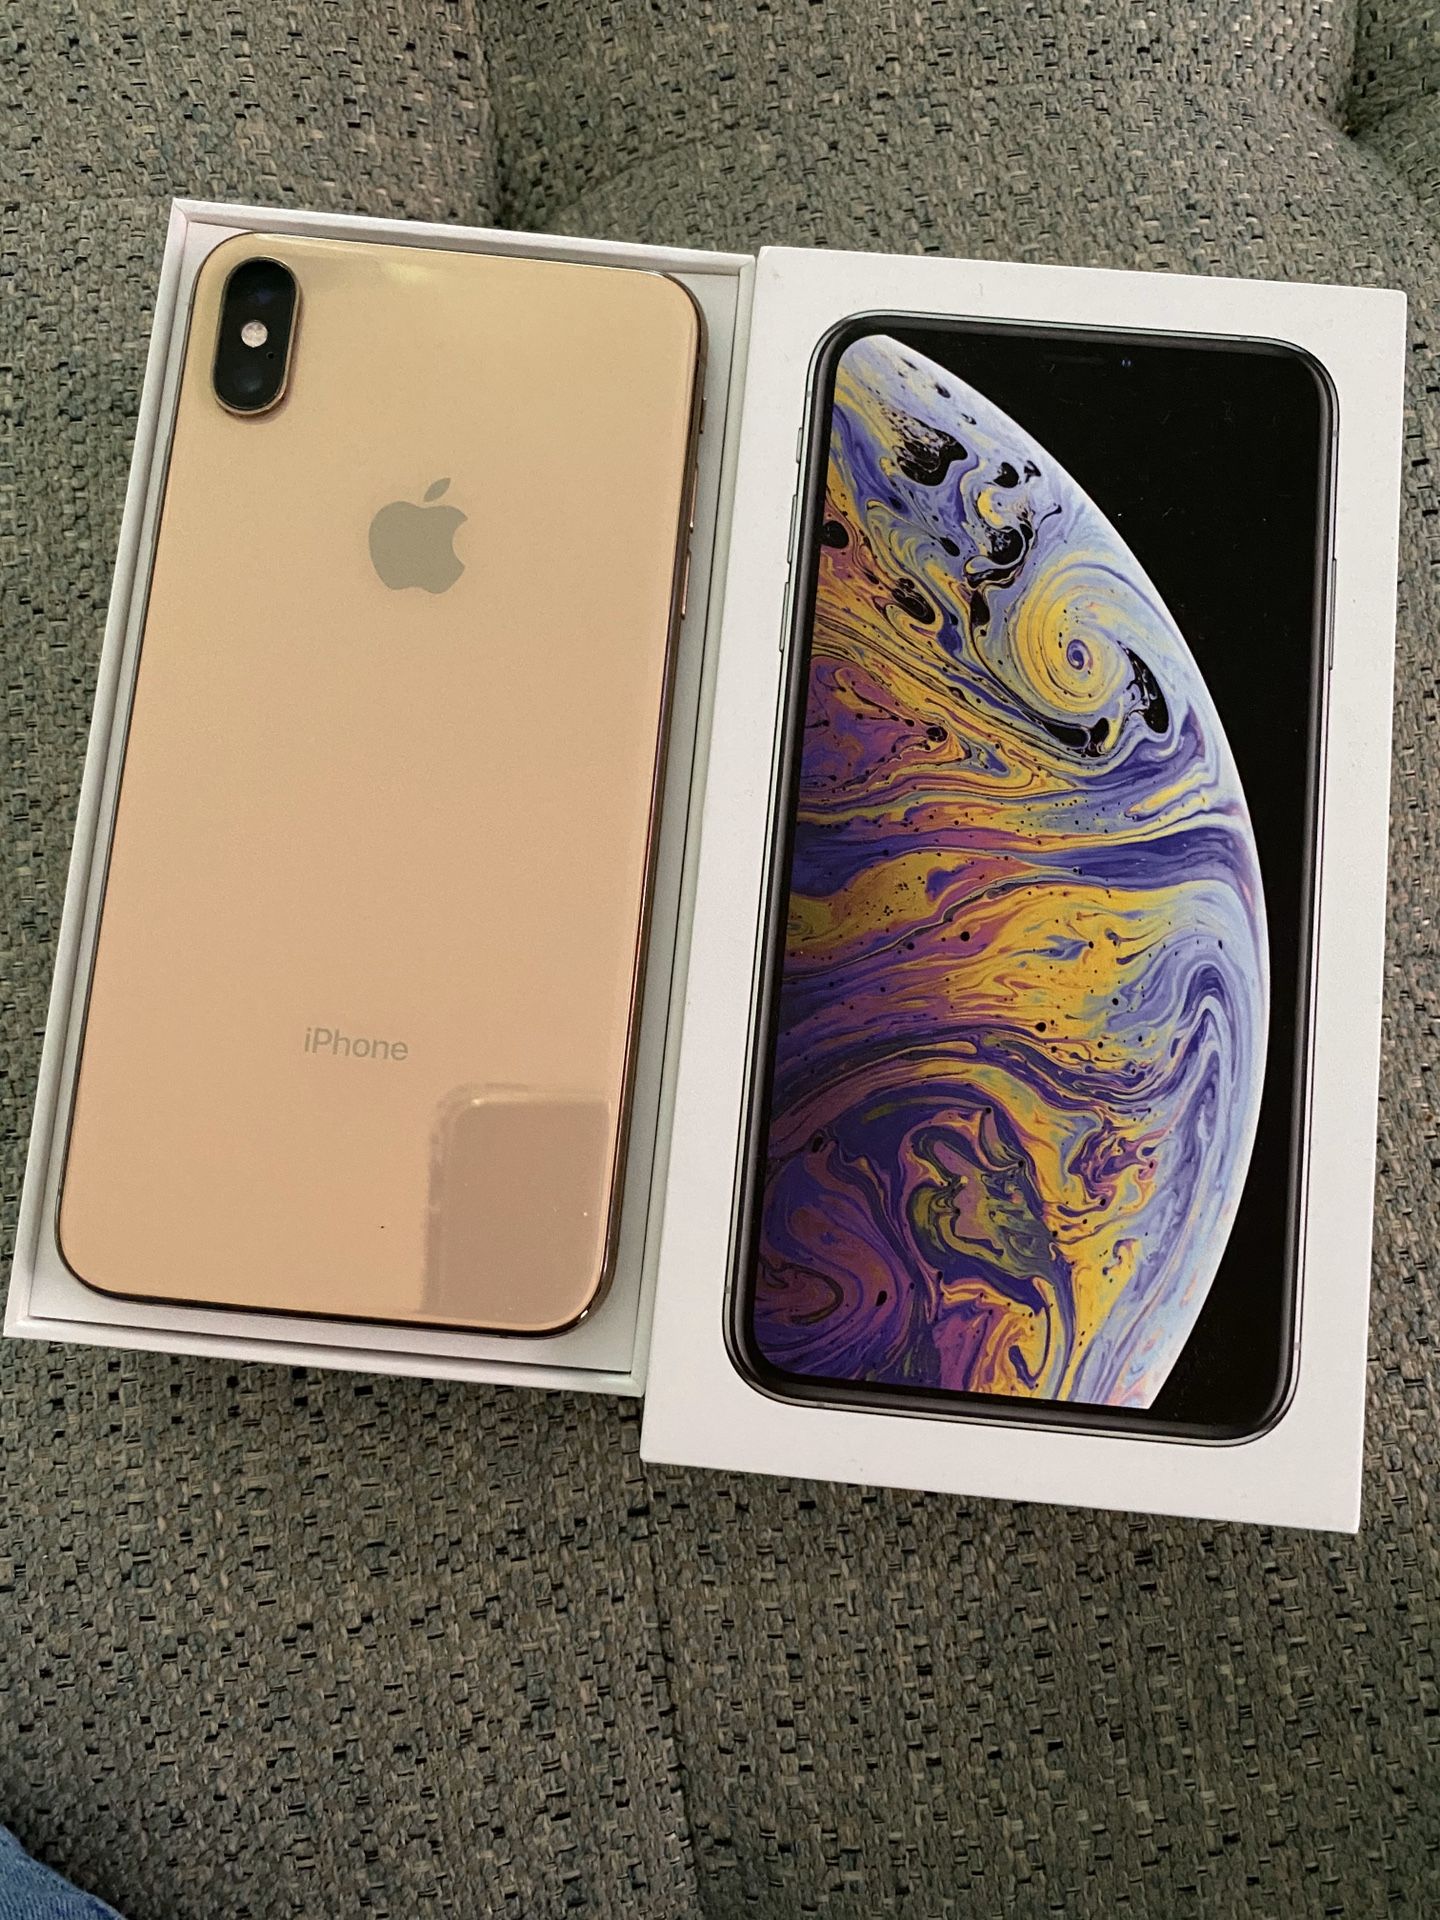 iPhone X max unlocked 256 gb have 5 only take Zelle then pick up discount price